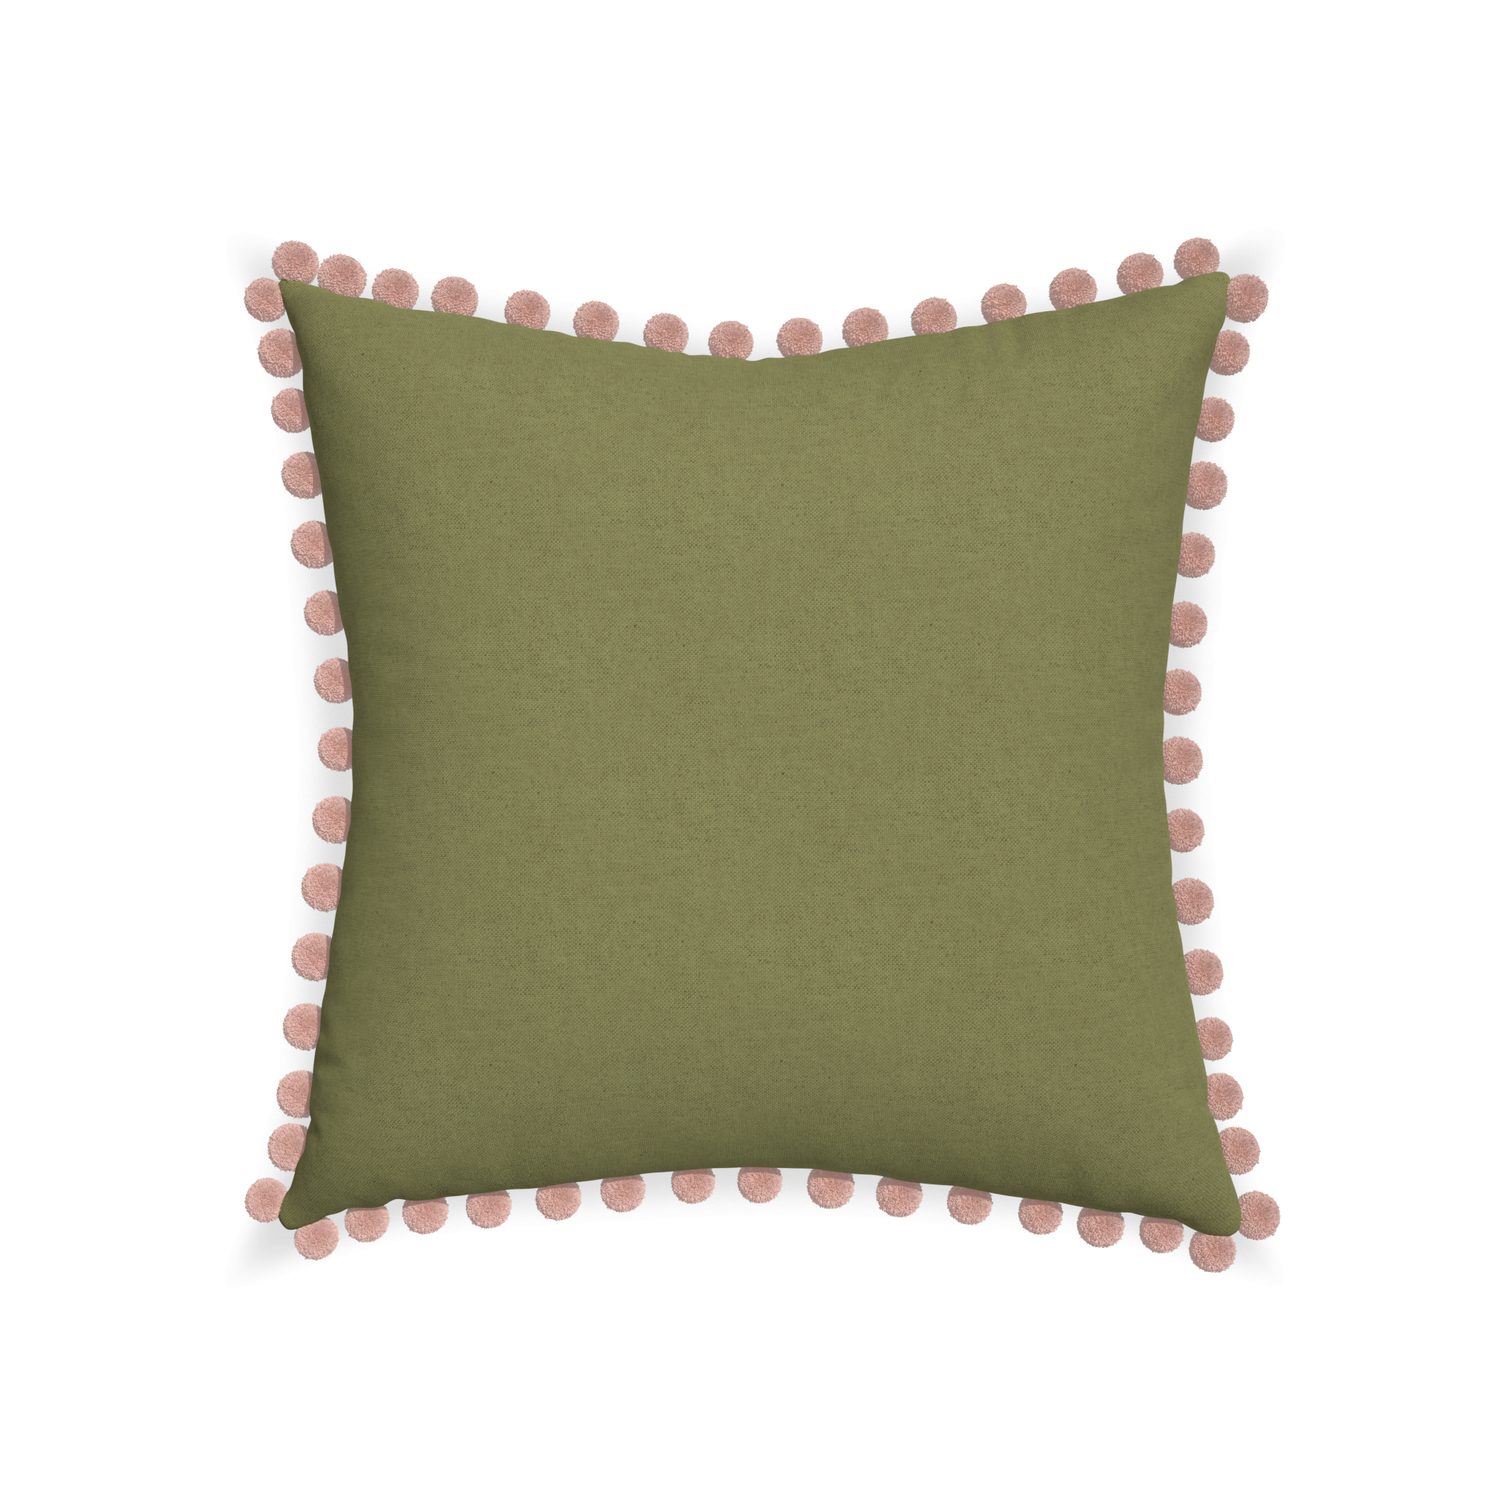 22-square moss custom moss greenpillow with rose pom pom on white background